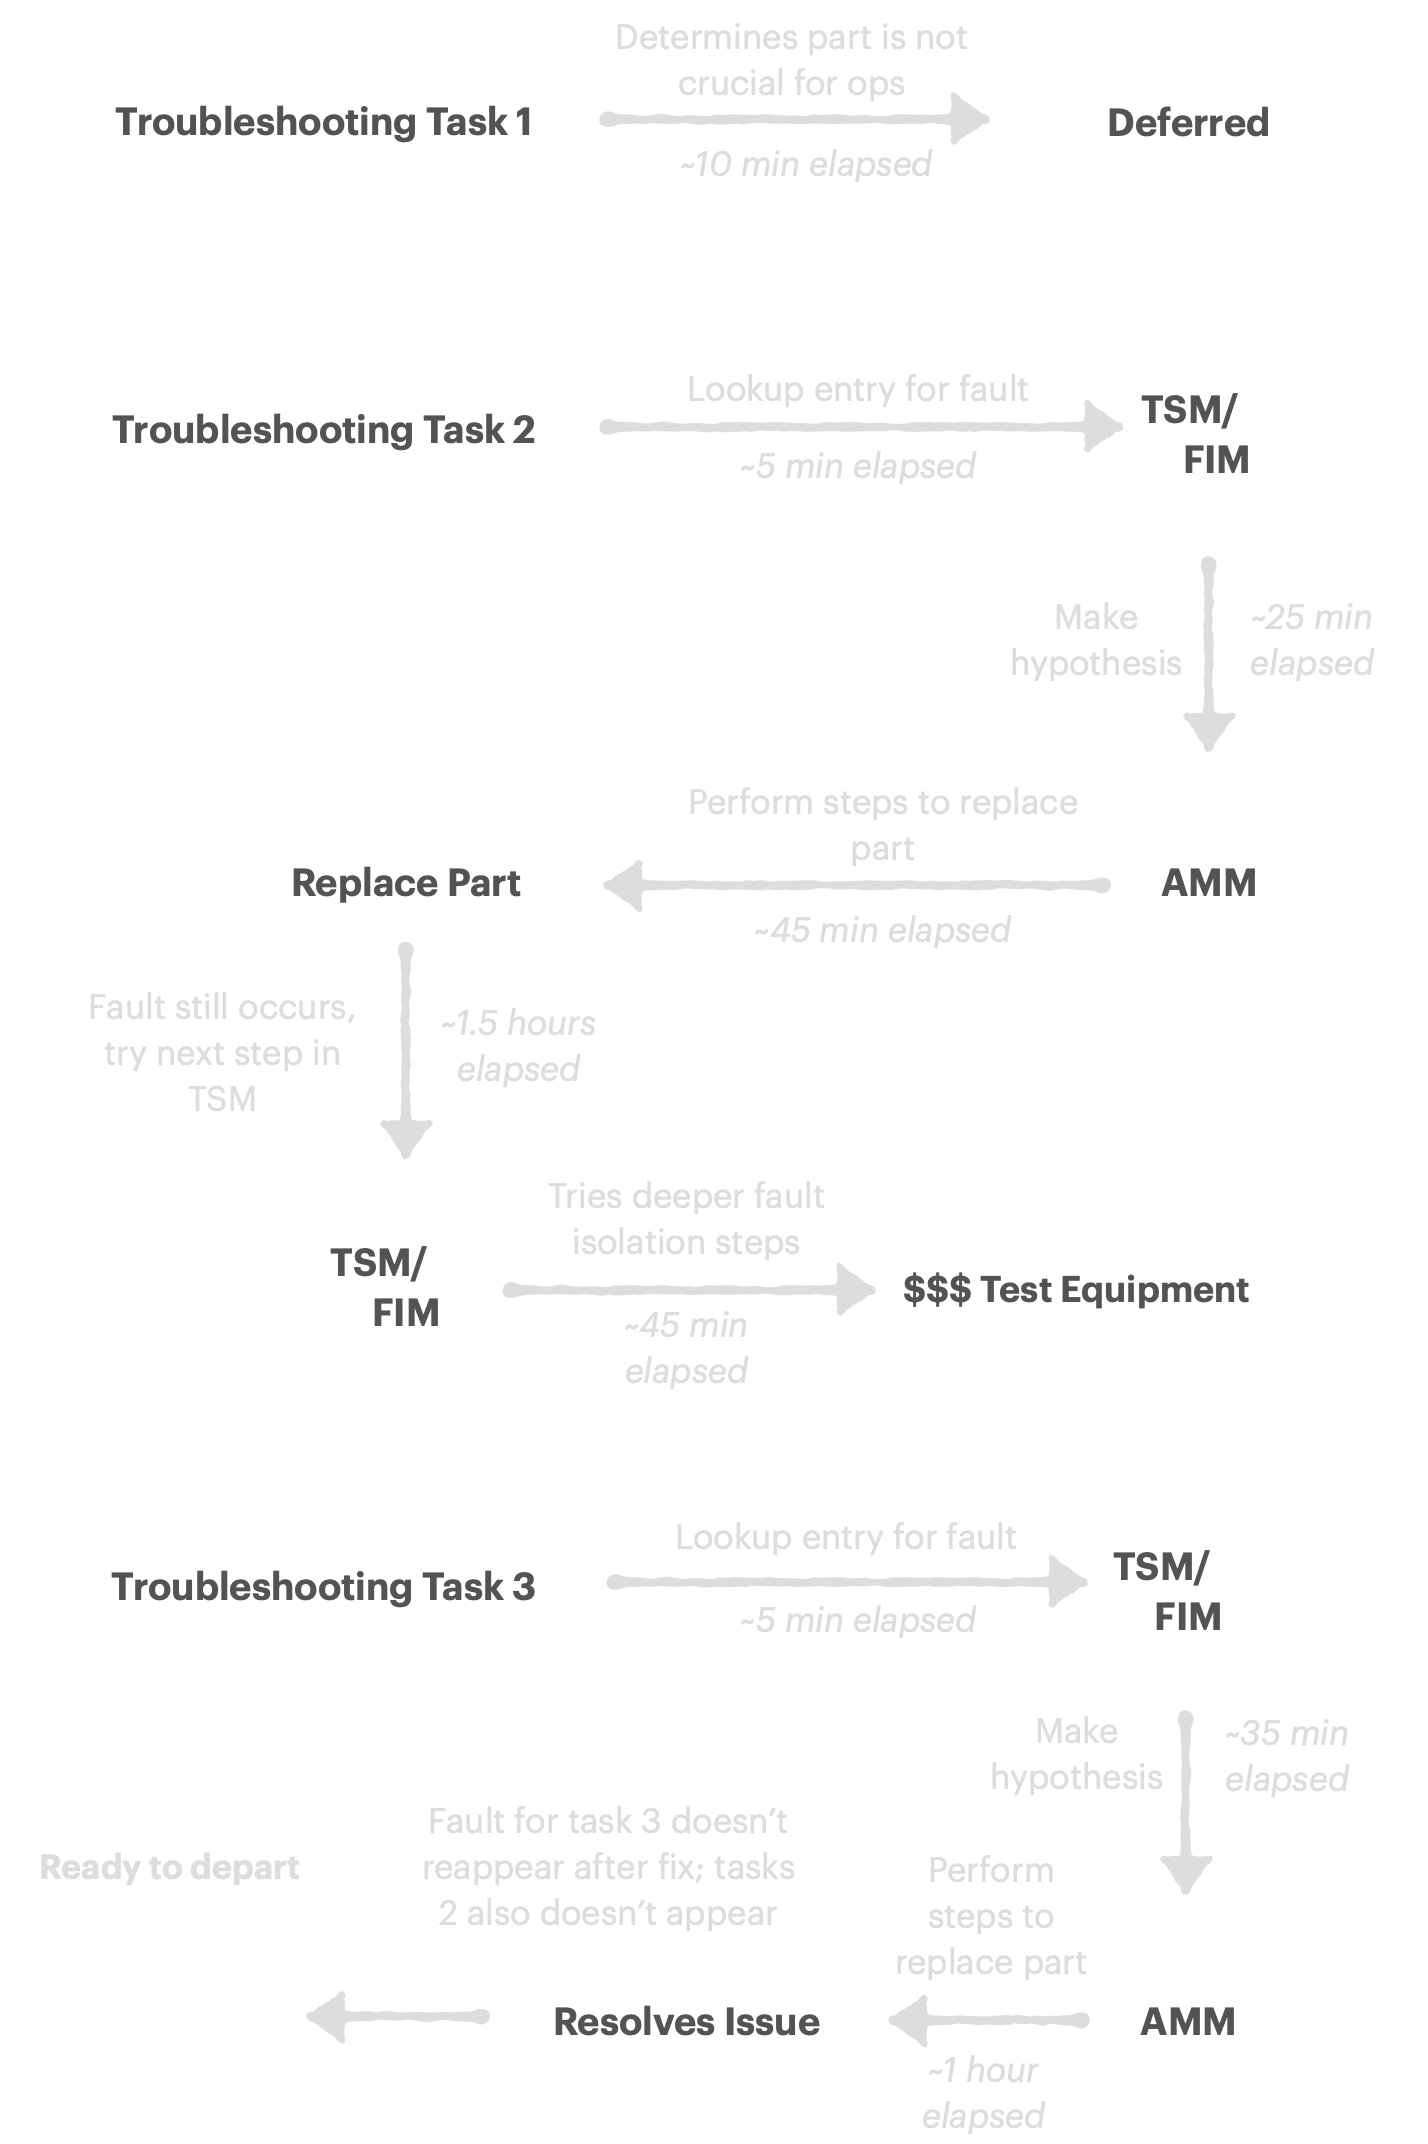 Diagram demonstrating how a typical "traditional" troubleshooting session is completed